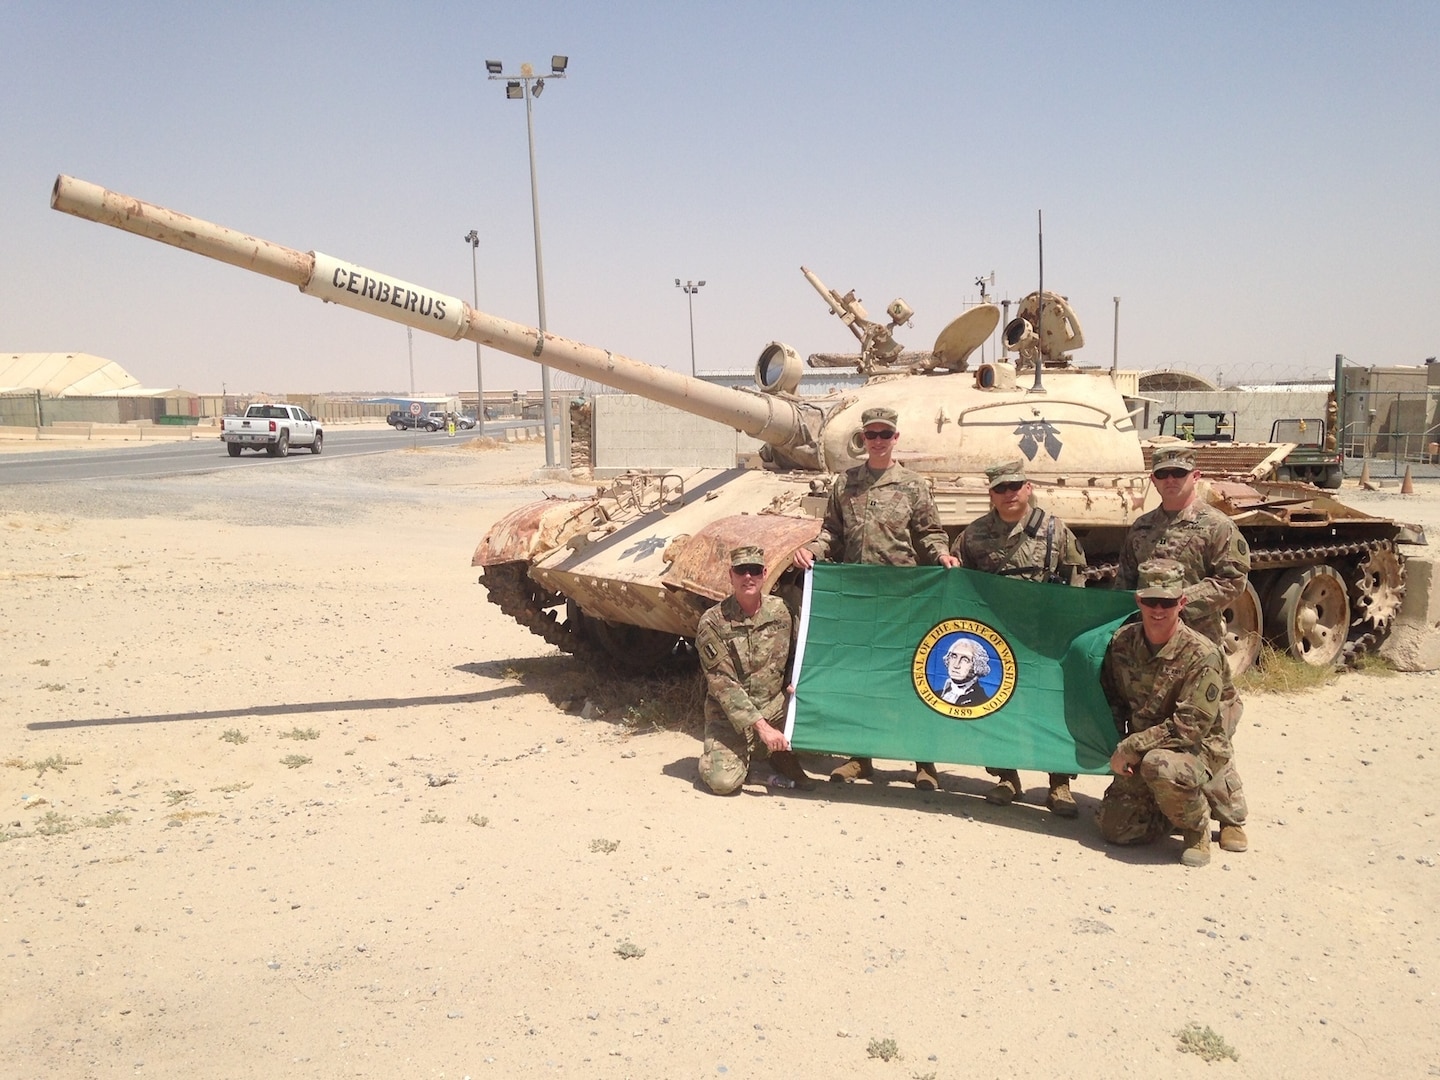 Members of the 122D Public Affairs Operations Center pose in front of a disabled  tank named "Cerbrus"  at Camp Arifjan, Kuwait. Arifjan is known as "The Gateway" because soldiers heading into theater must first check in through Kuwait. From left to right: Master Sgt. Neal Mitchell, Capt. James Deakins, Col. Stanley Seo, Capt. Benjamin Burbank and Maj. Eric Trovillo. (U.S. National Guard photo by Staff Sgt. Michael Tietjen)